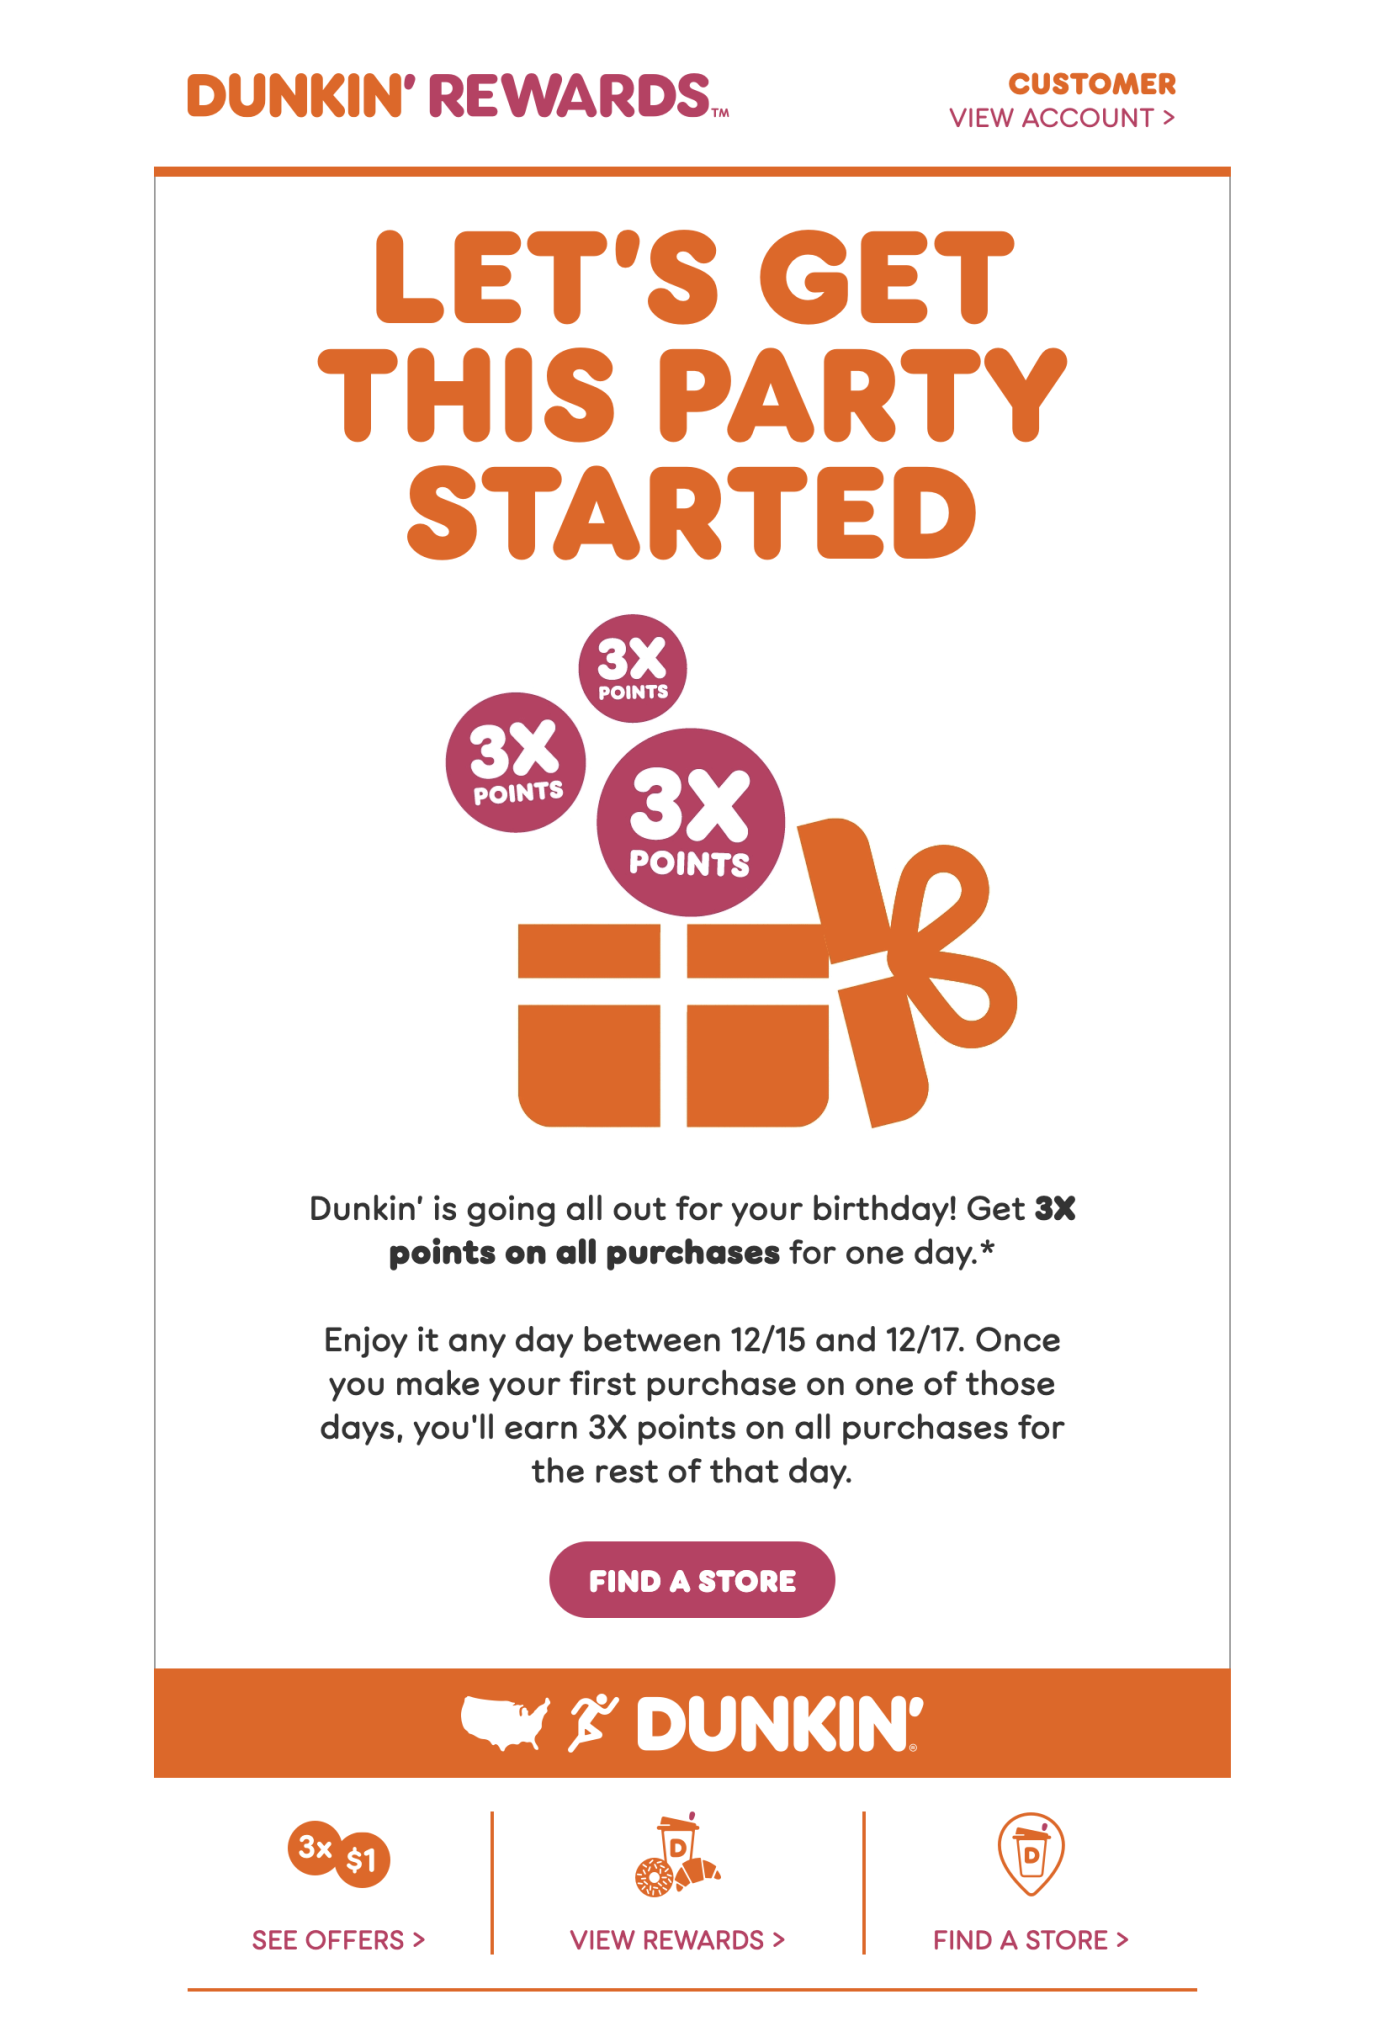 Birthday email from Dunkin' Rewards with the title Let's Get This Party Started and an illustration of a gift box and 3x points icons.